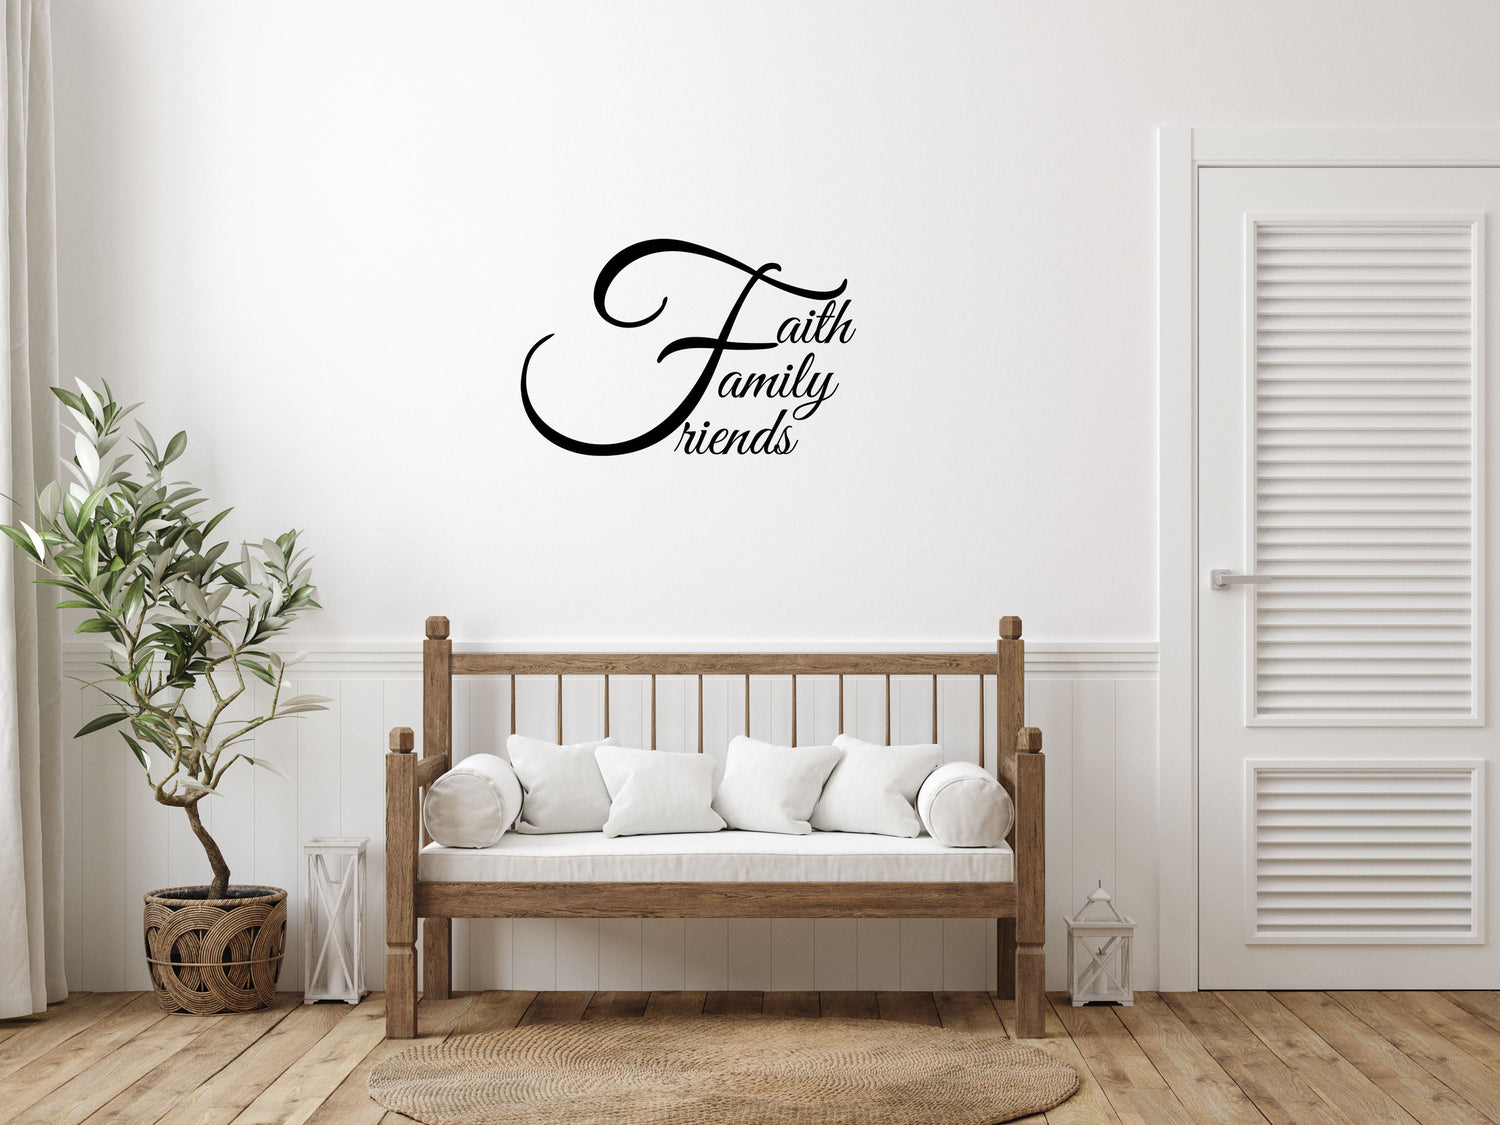 Faith Family Friends Vinyl Wall Decal Inspirational Wall Signs 